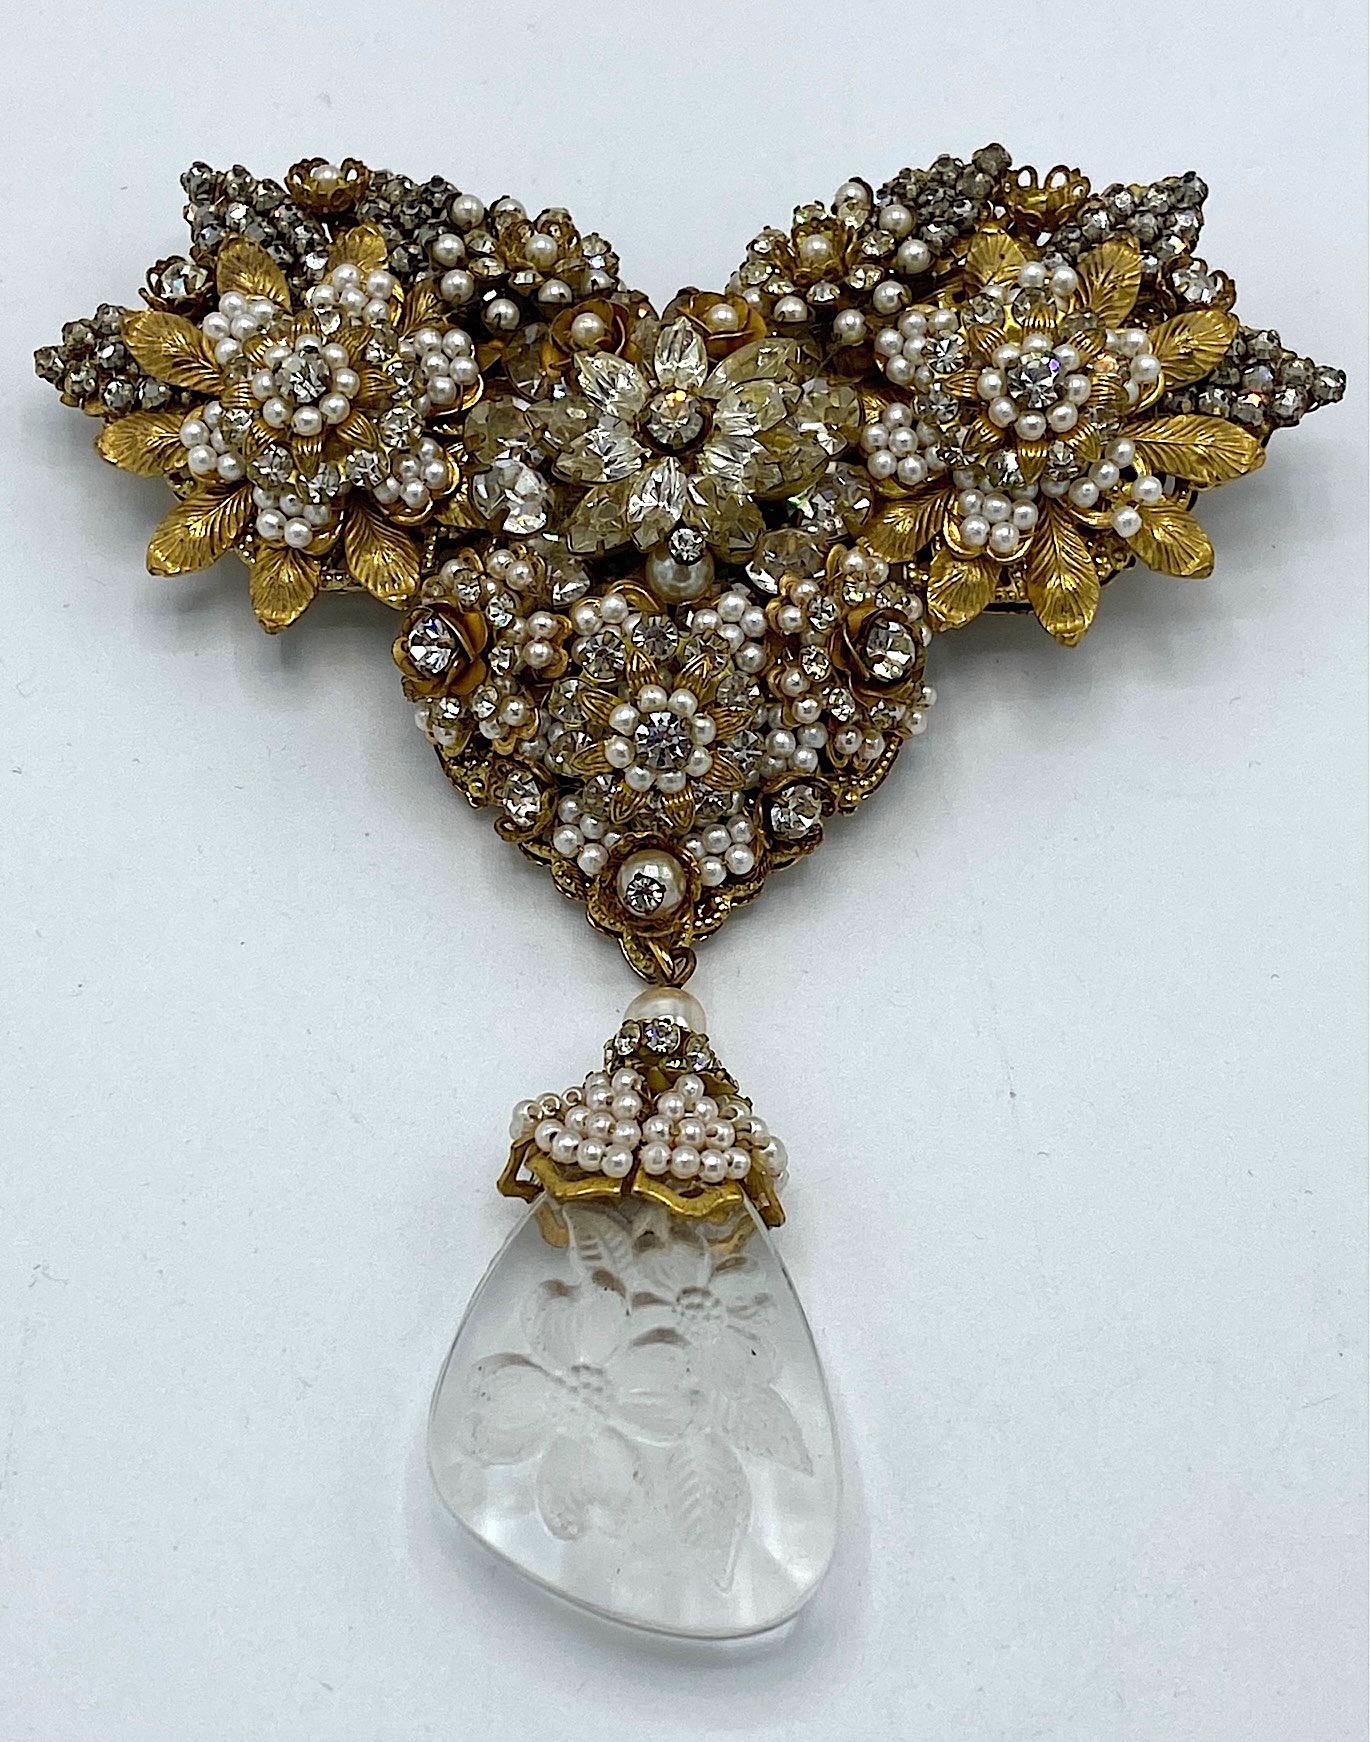 Presented here is a rare and large brooch from the late 1950s to early 1960s by Robert DeMario. The openwork lace like metal is gold plated and wired with faux seed pearls and rhinestones in a floral motif. Hanging from the bottom is a floral etched